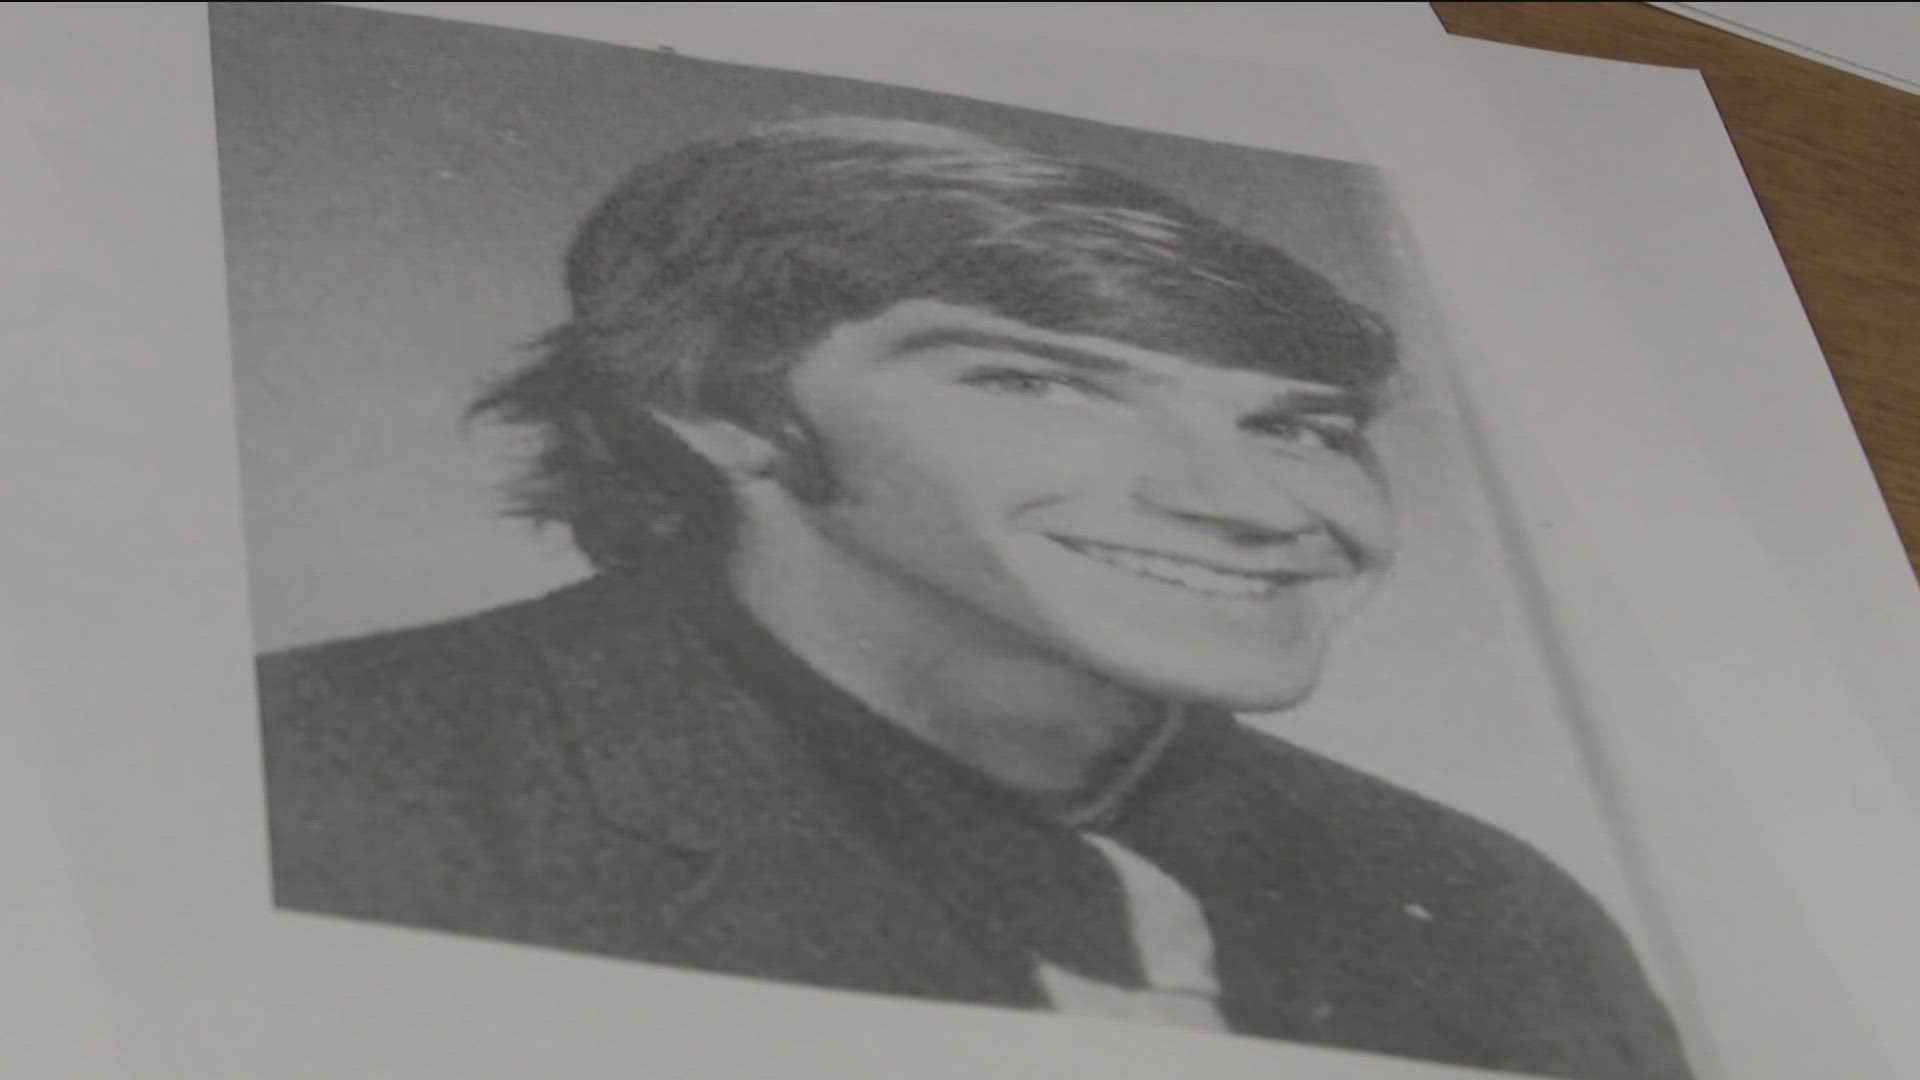 Kyle Clinkscales went missing on his way back to Auburn University in 1976.